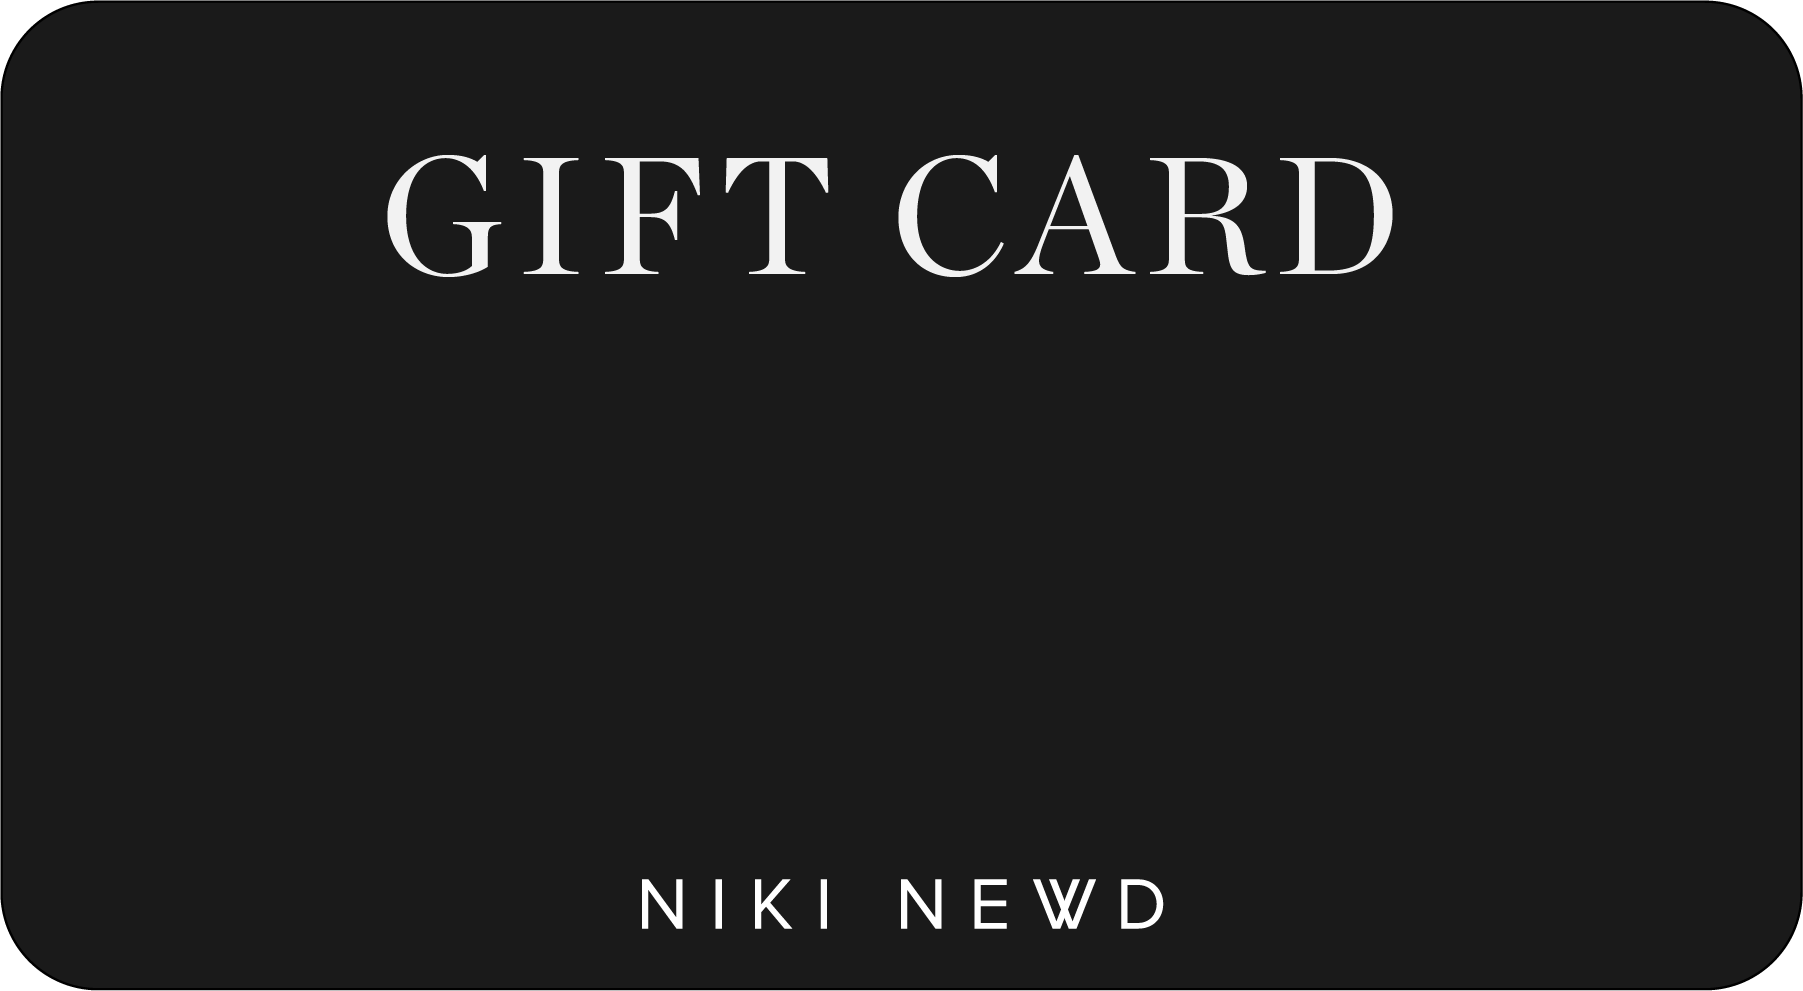 Niki Newd Gift Card for facial and massage